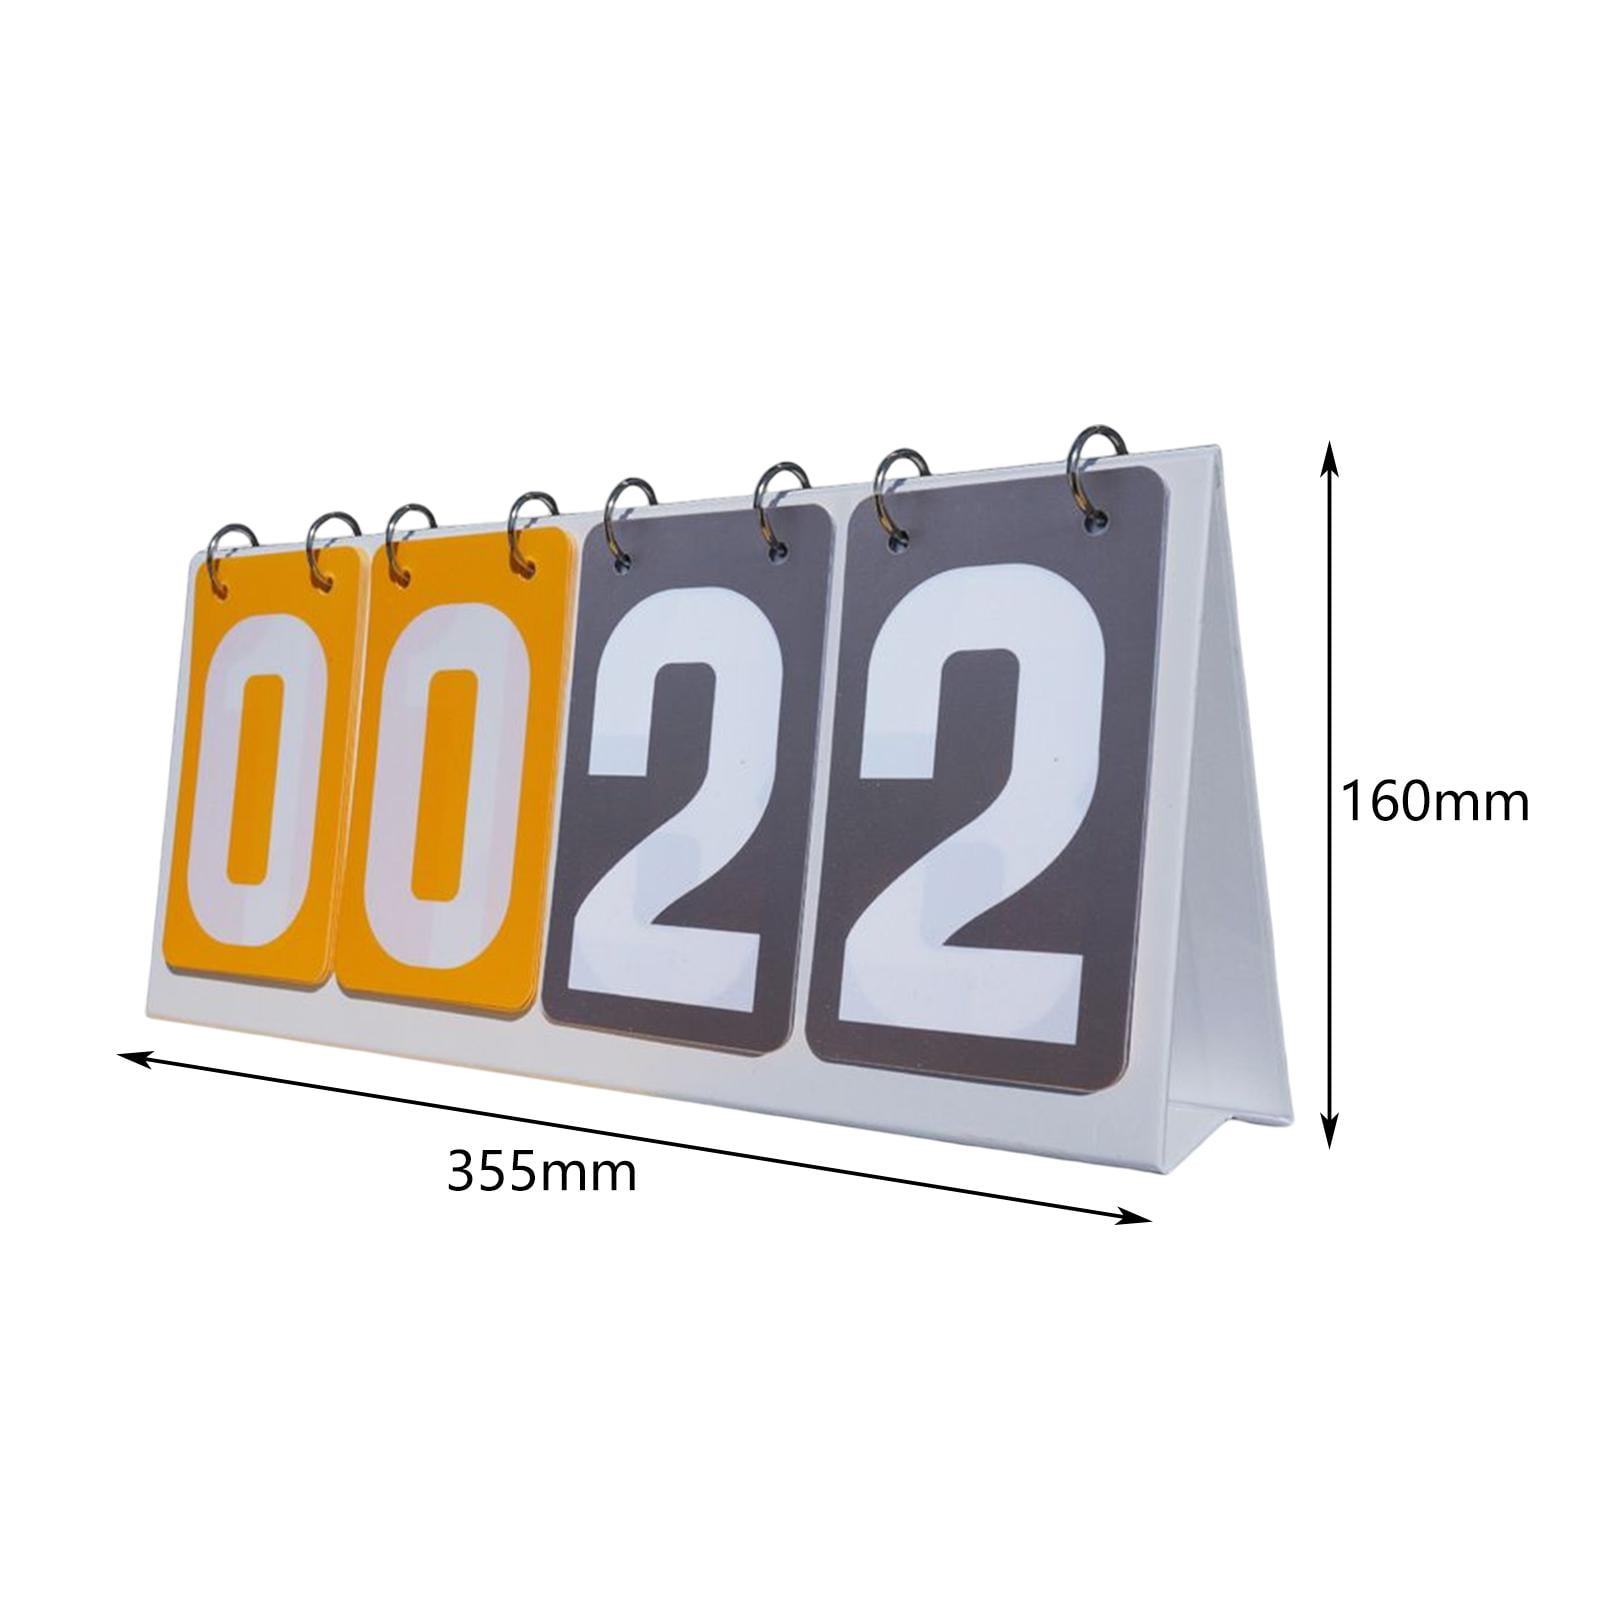 4 Digit Score Board Scoring Scorekeeper Competition Game Tabletop Scoreboard for Basketball Football Volleyball , Yellow Gray